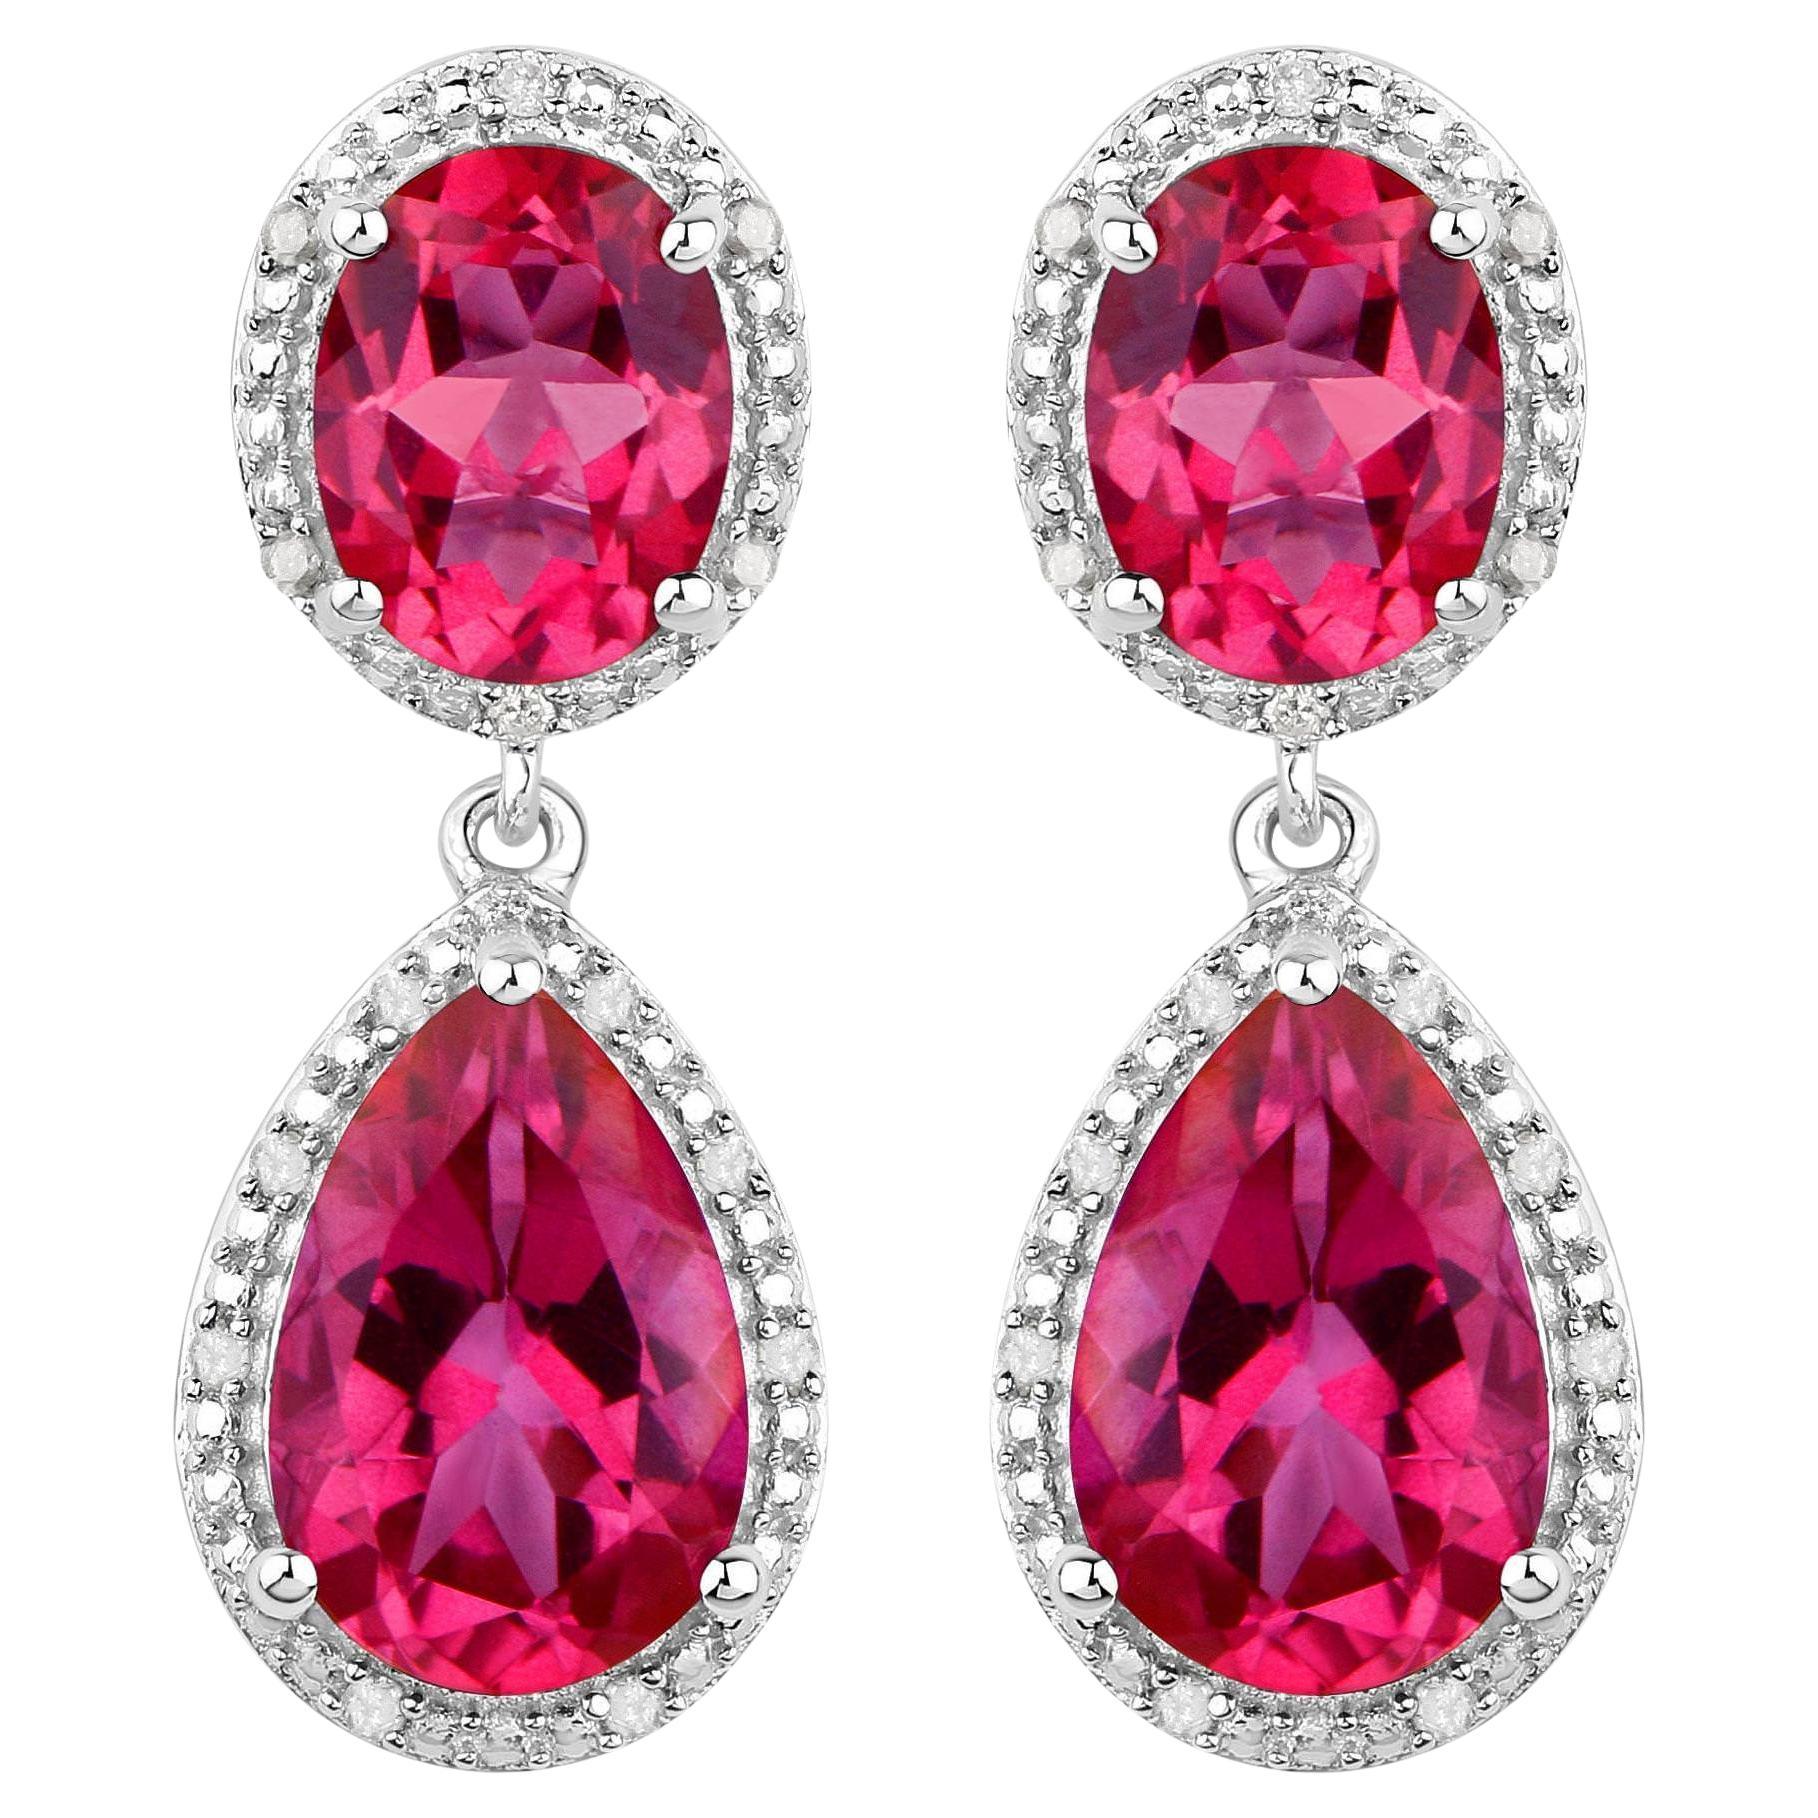 Hot Pink Topaz Earrings Diamond Setting 11.35 Carats Total For Sale